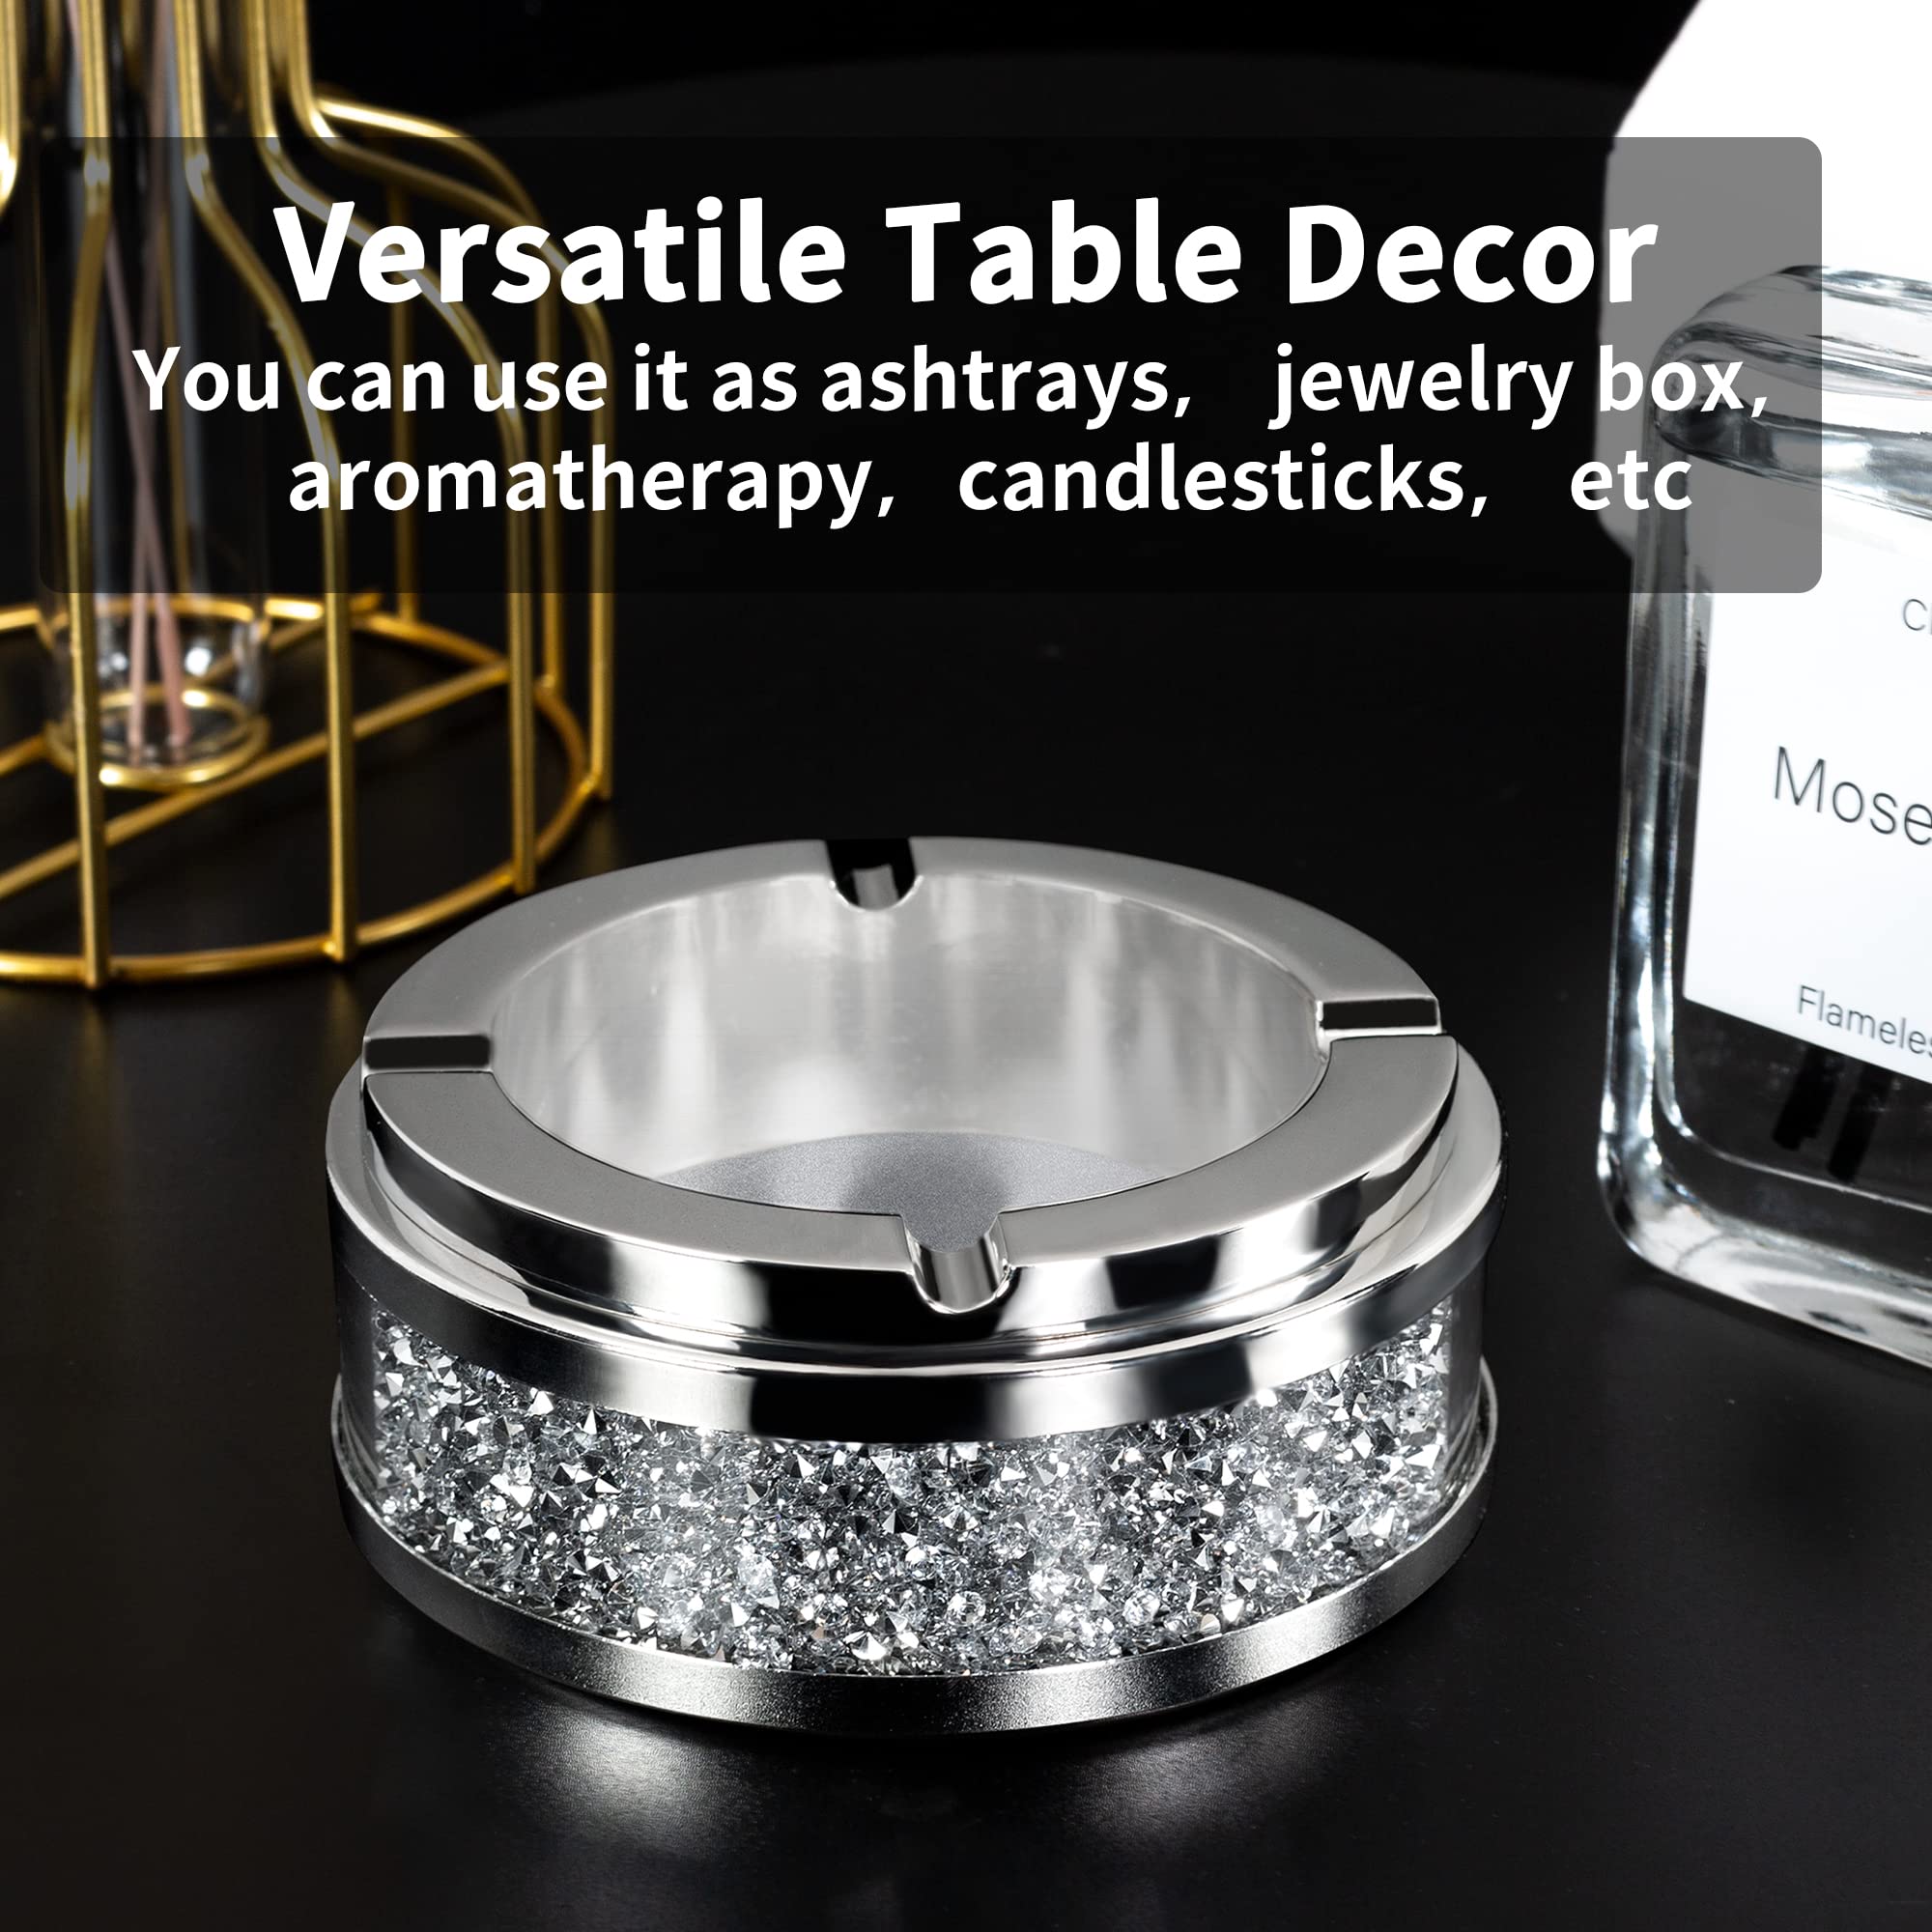 Ashtray, Cool Ashtrays for Cigarettes Outdoor, Cute Glass Ash Tray for Weed, Crushed Diamond Home Decor, Bling Crystal Ashtray for Smokers Indoor Use, 4"L x 4"W x 1.57"H, Silver